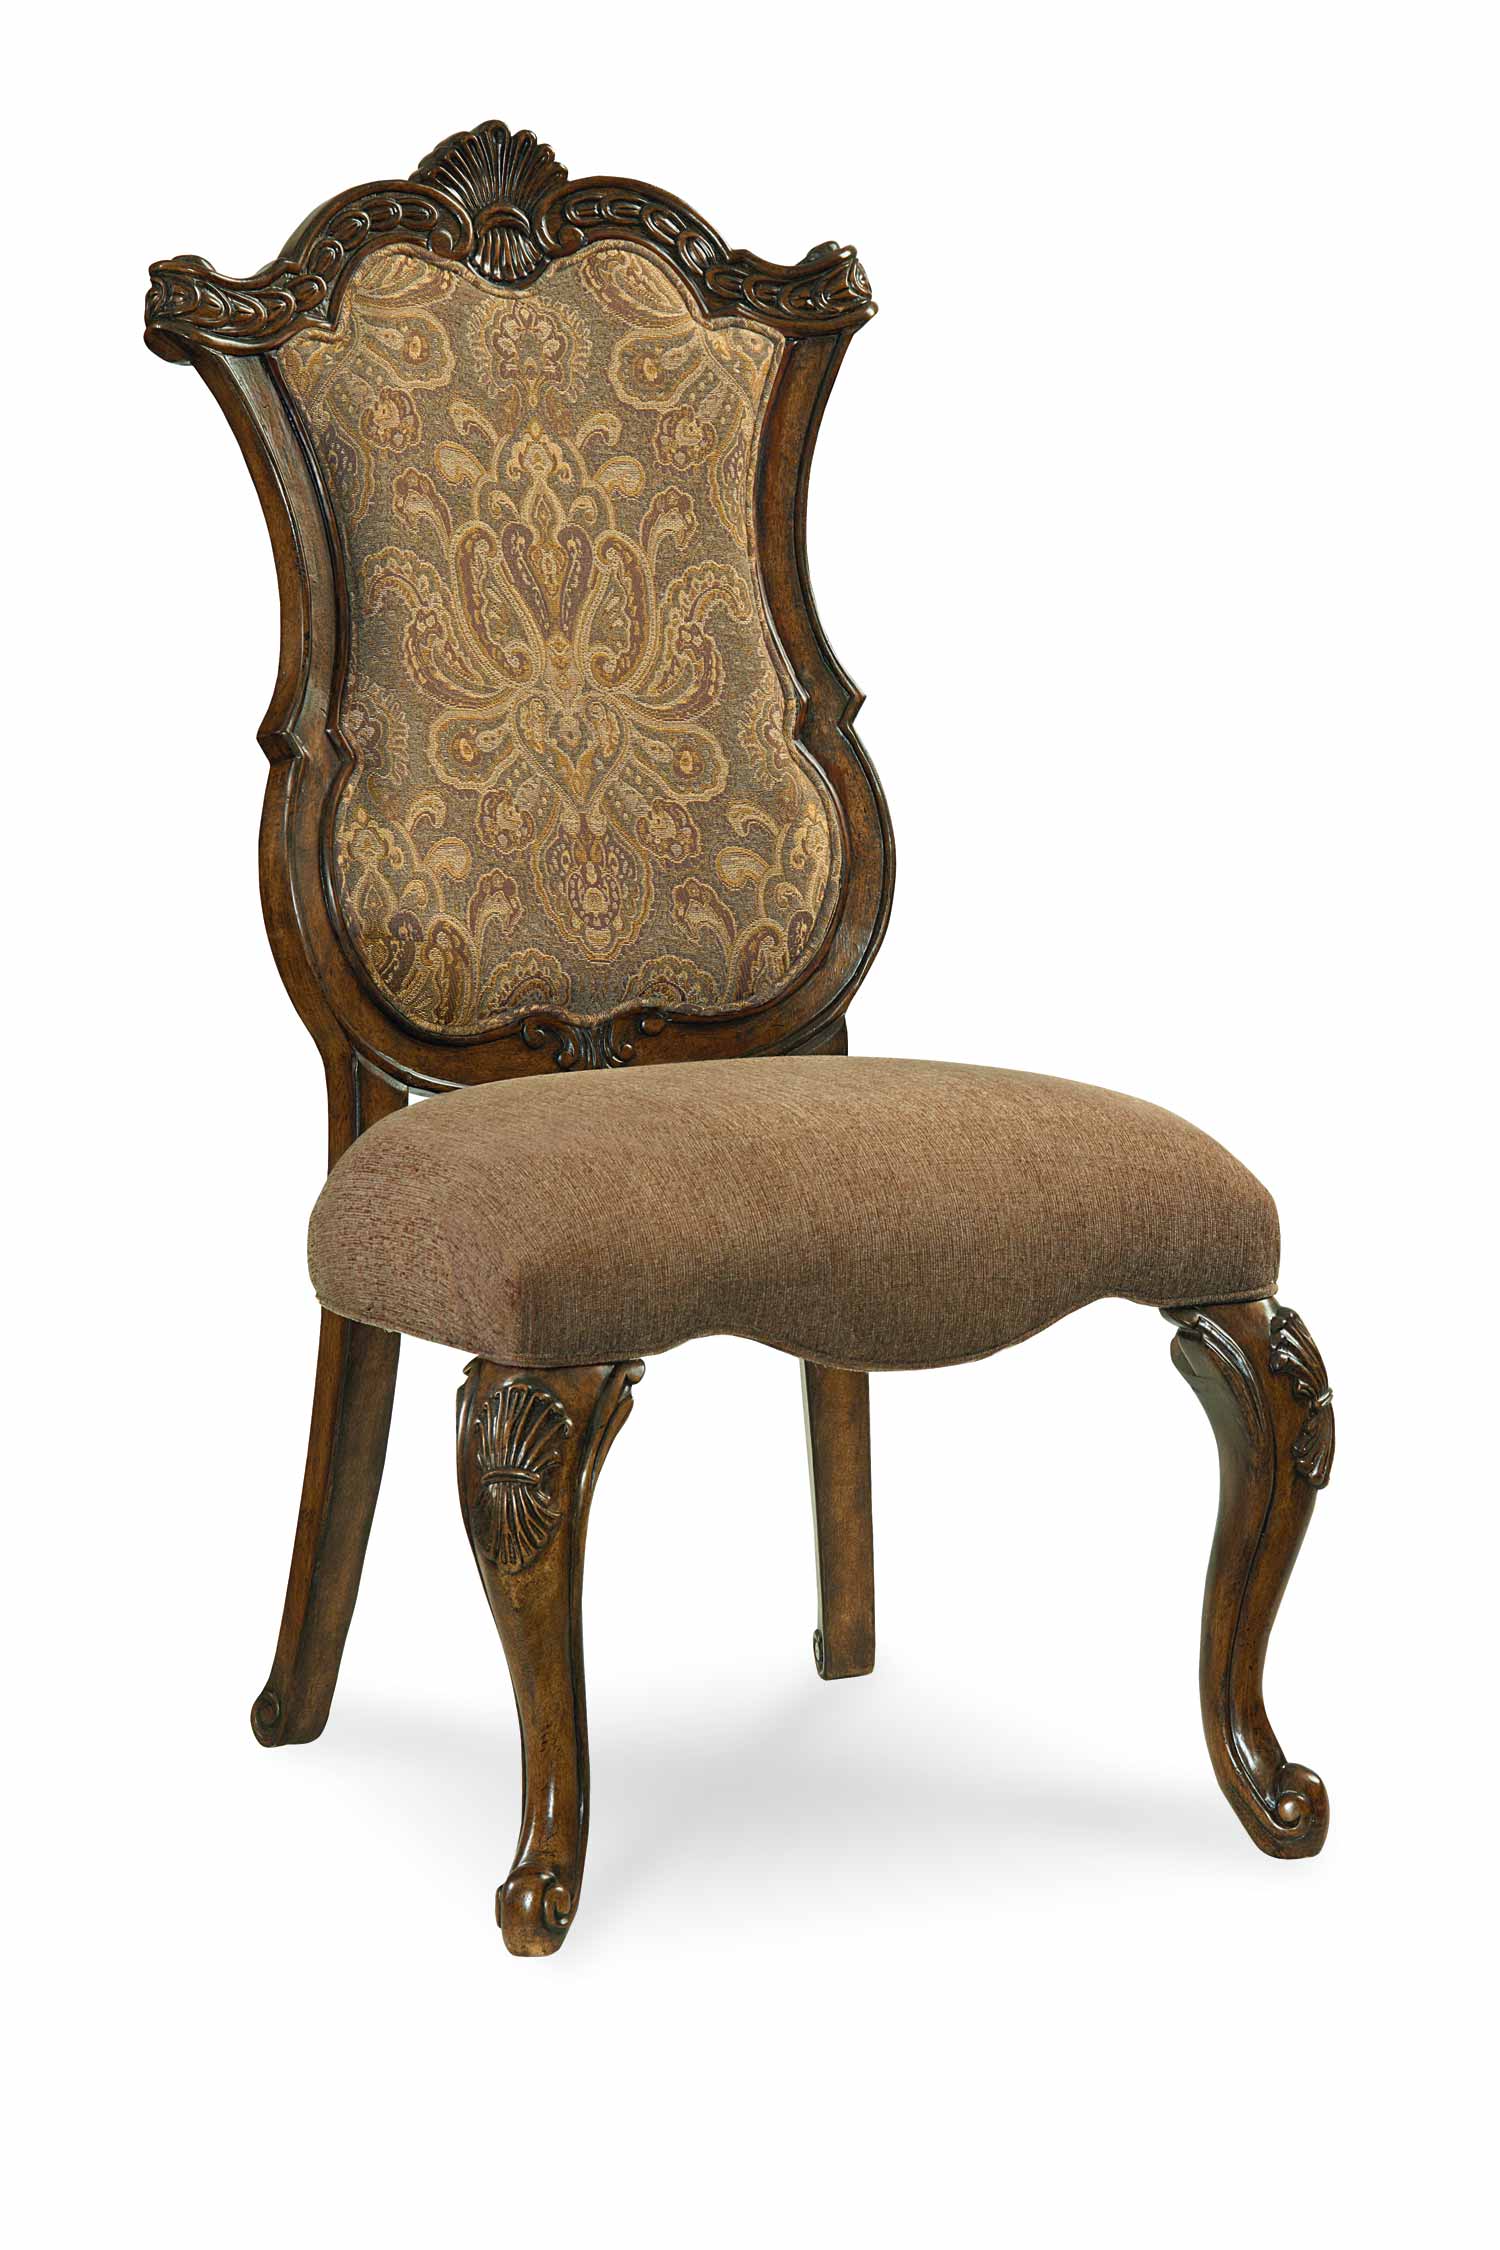 Legacy Classic Pemberleigh Upholstered Side Chair - Brandy/Burnished Edges